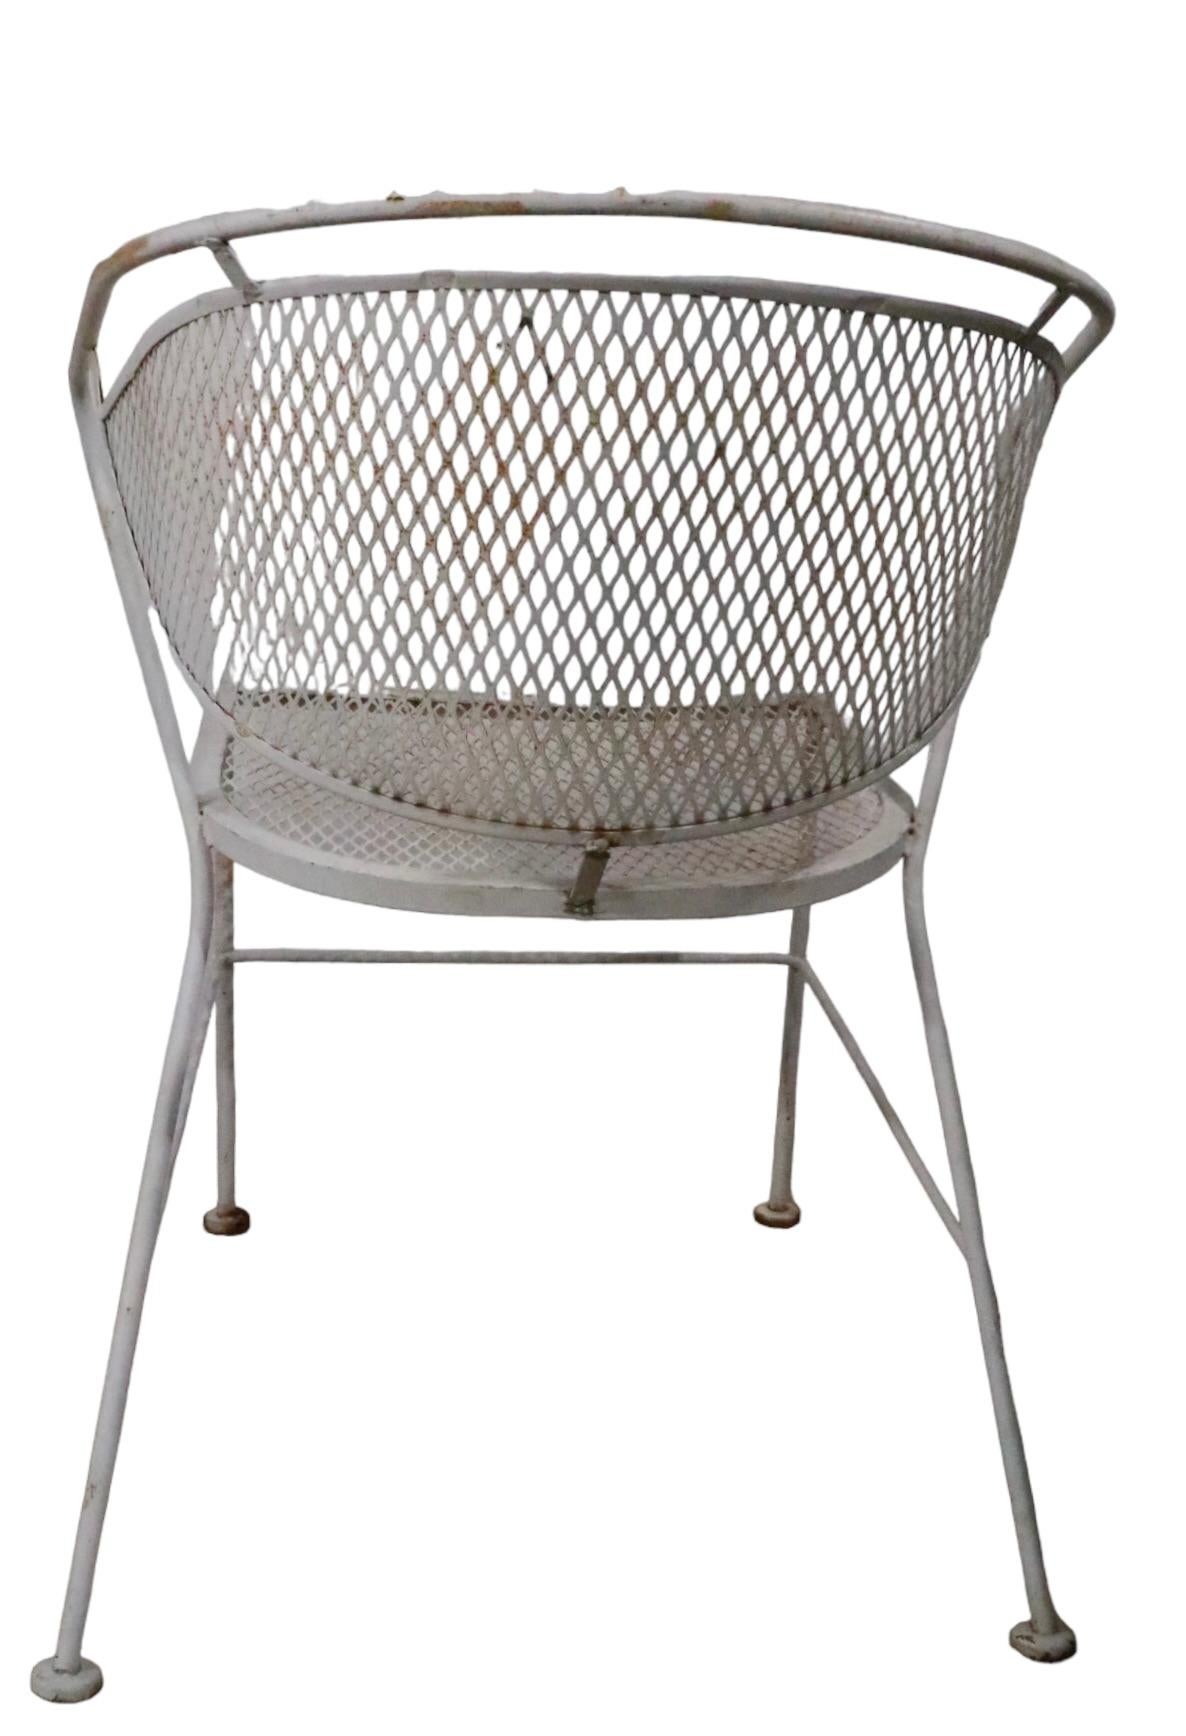 Mid-Century Modern Wrought Iron and Metal Mesh Garden Side, Dining Chair by Salterini, C 1950s For Sale